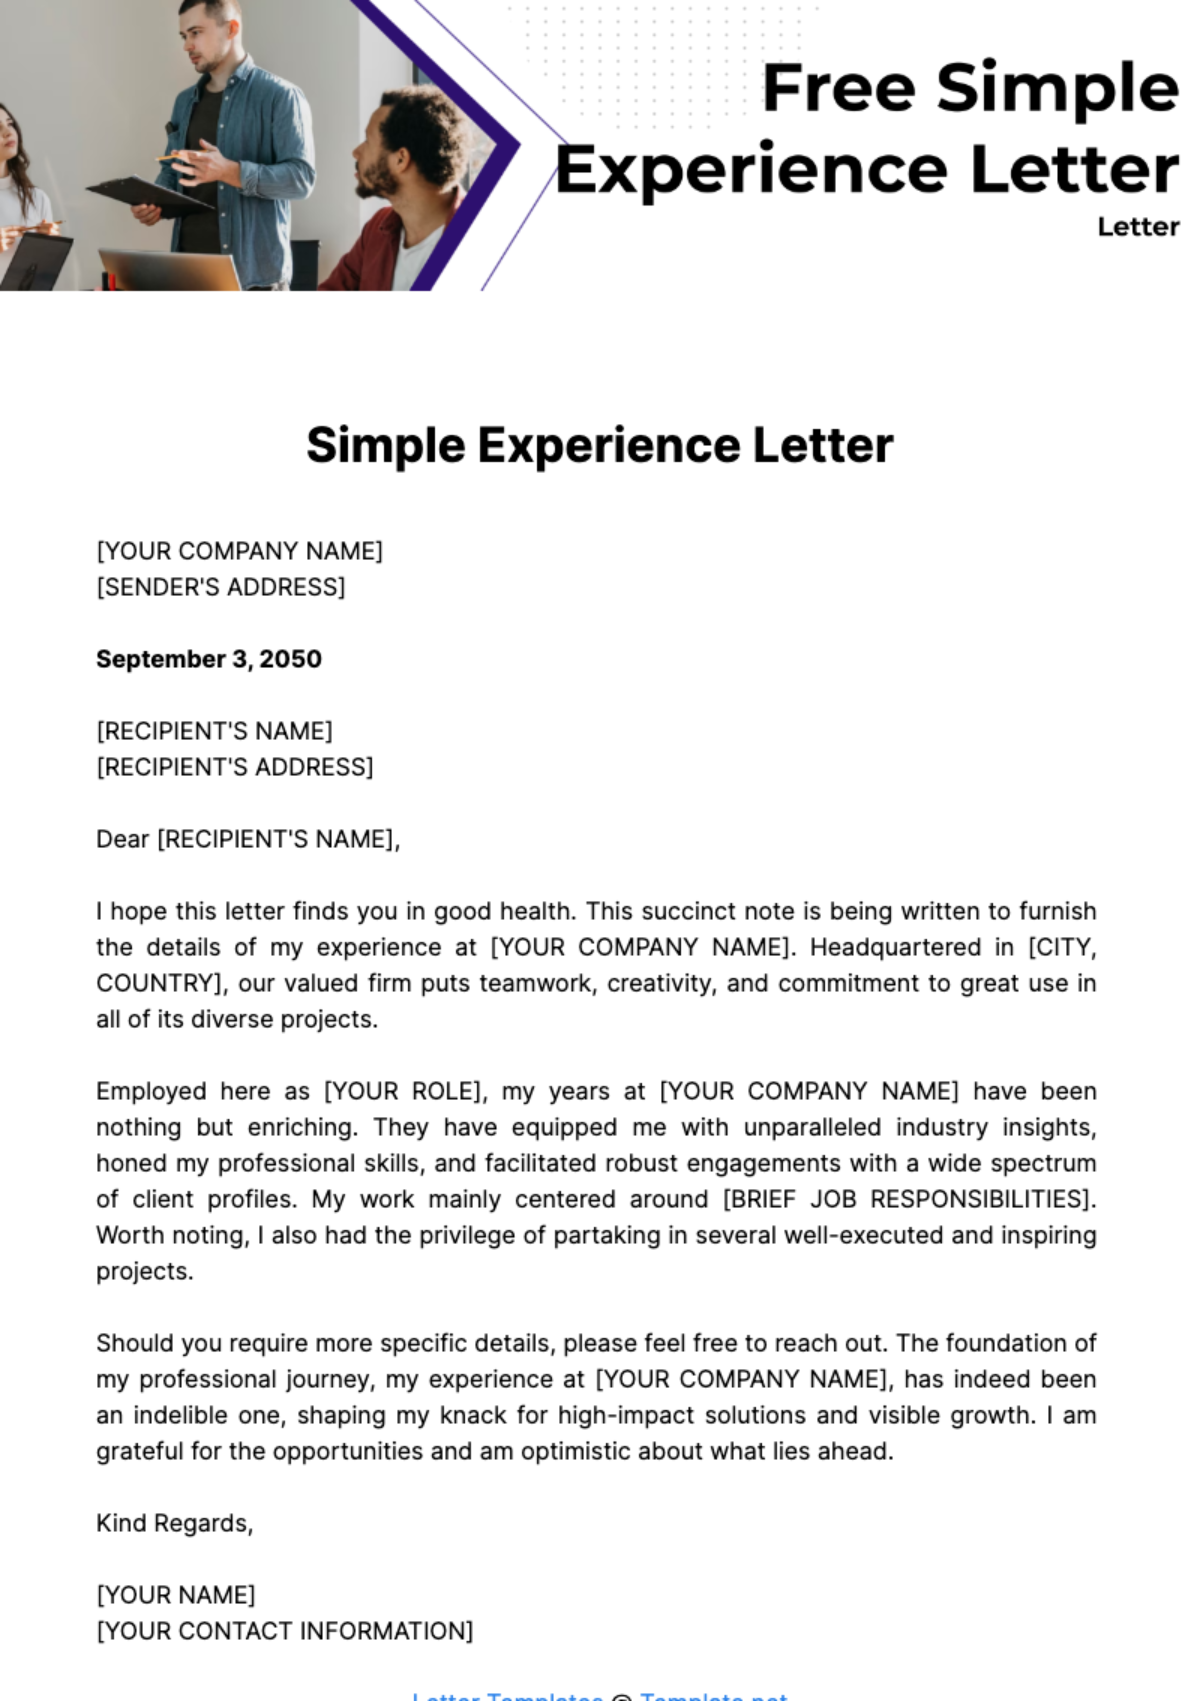 Free Simple Experience Letter Template